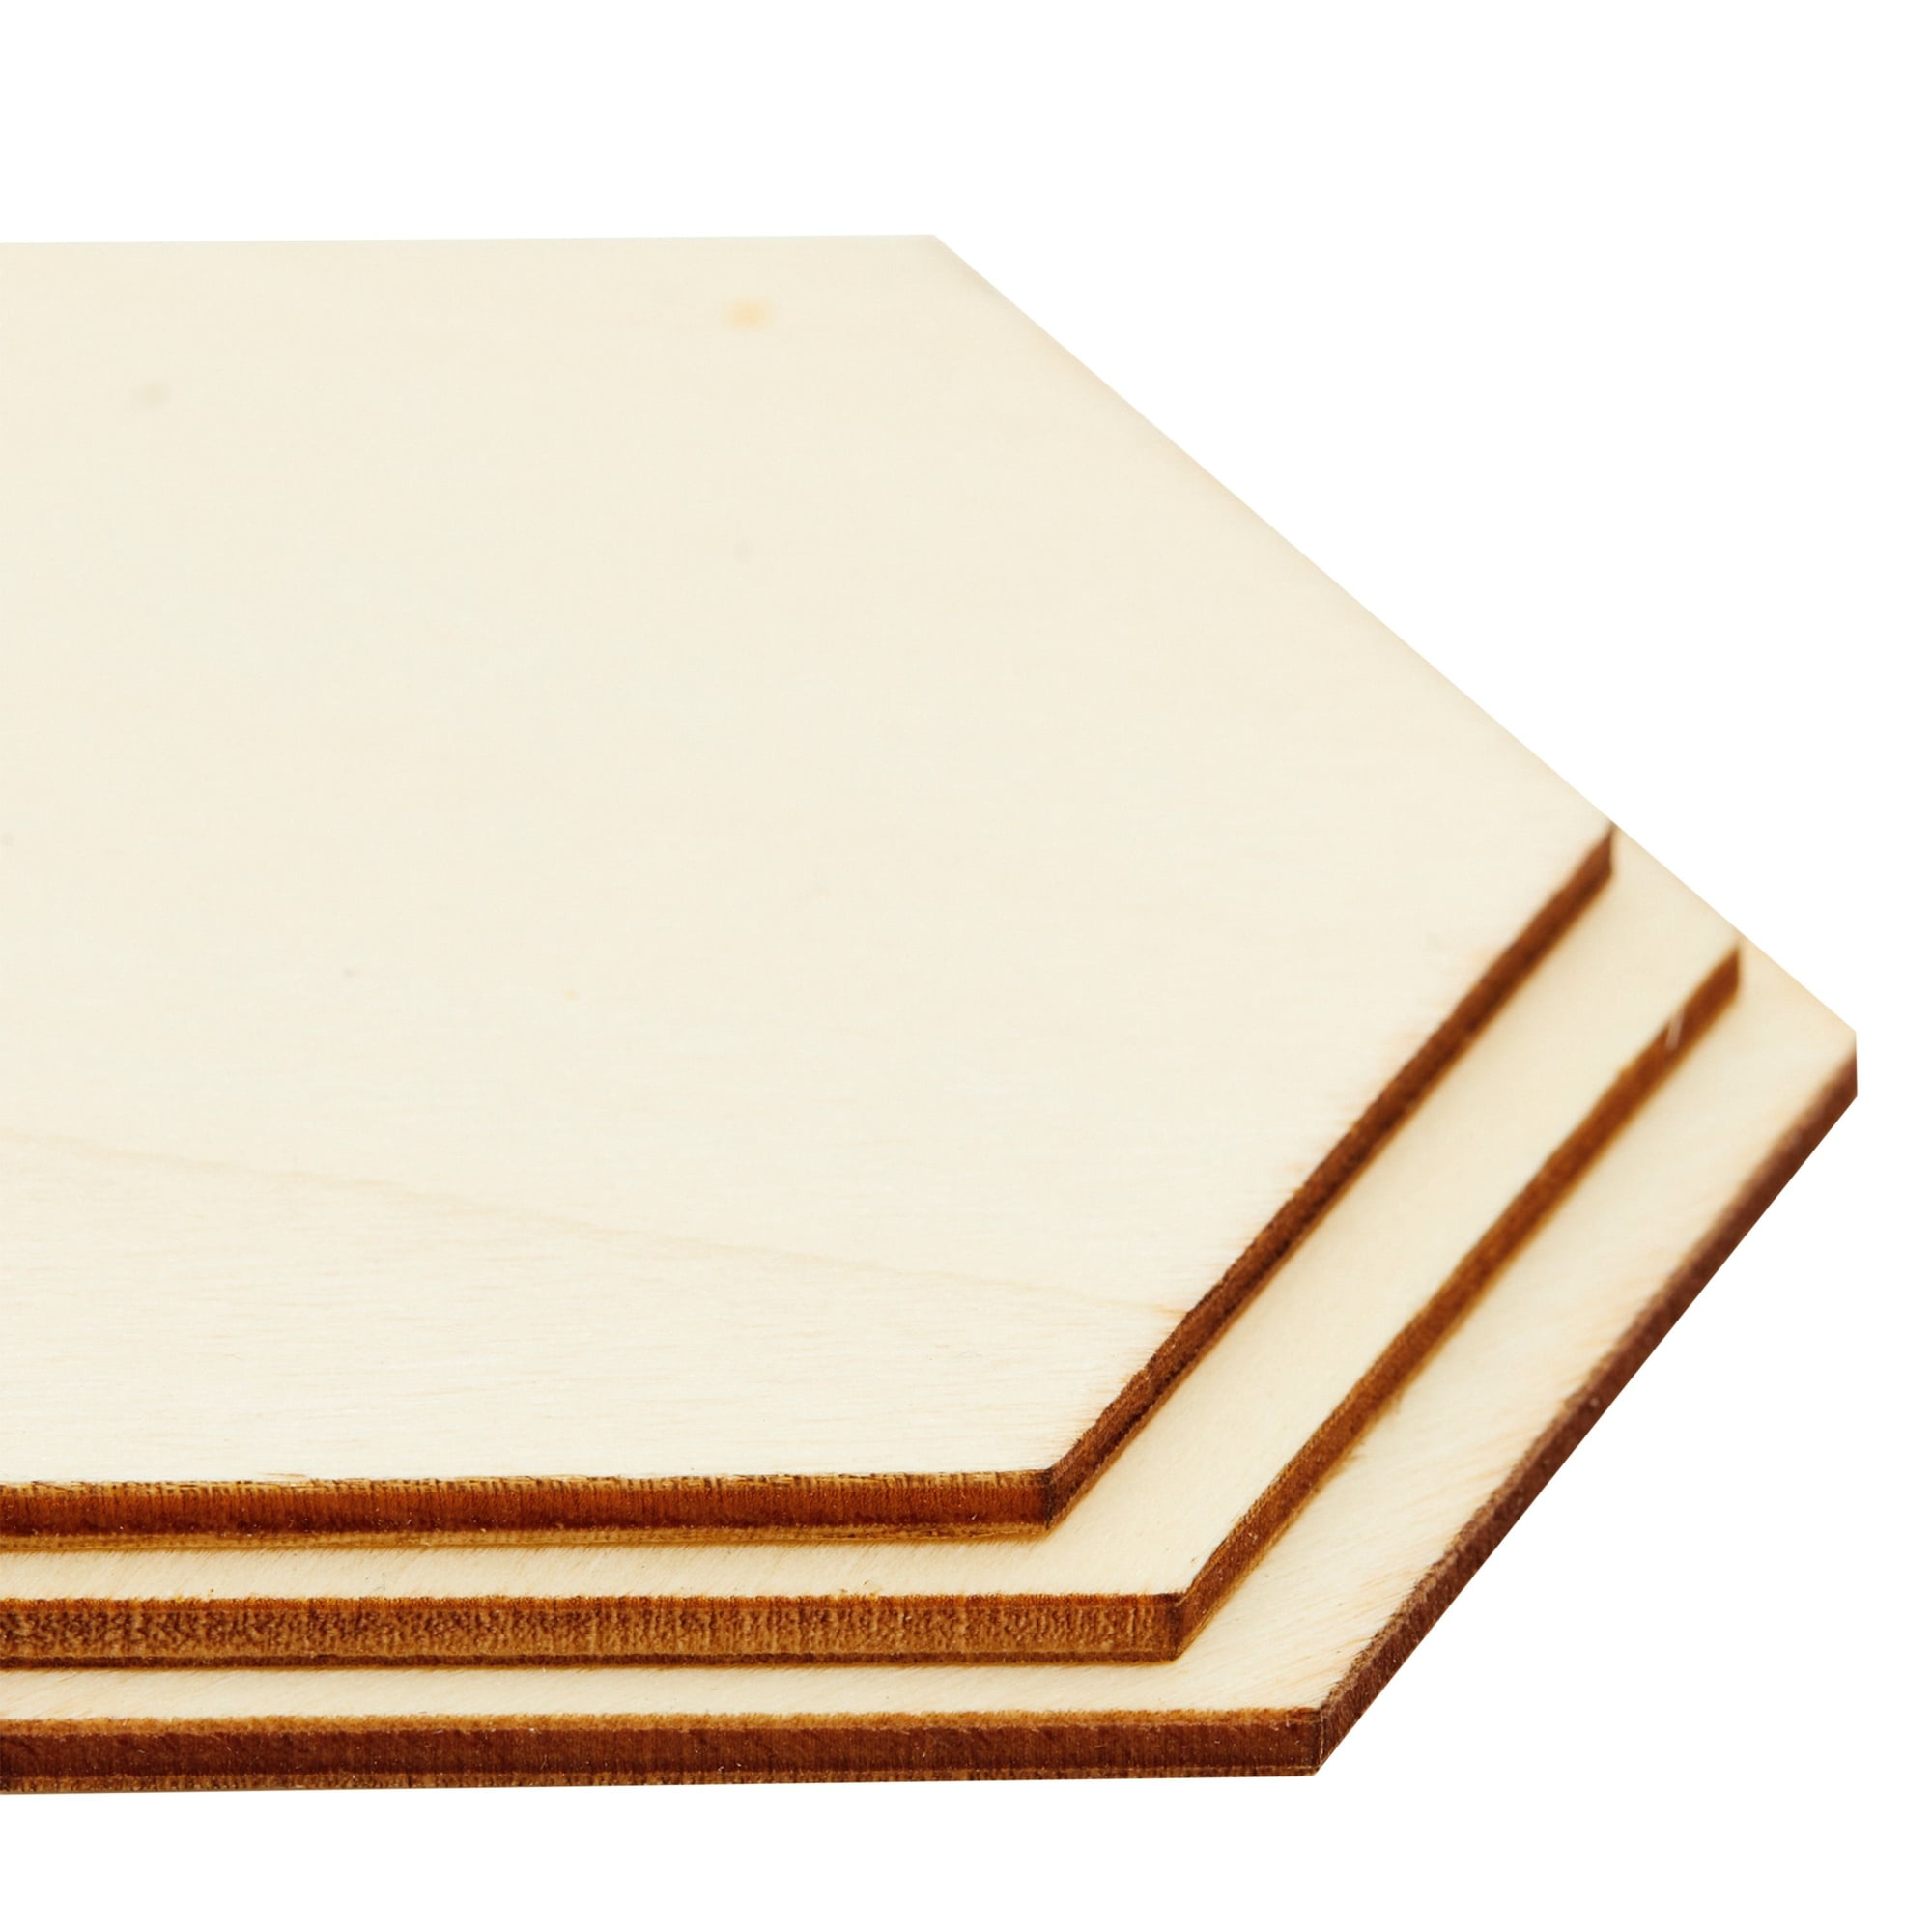 Unfinished Wood Hexagon Blanks 10 inch for Crafts & Honeycomb Décor, Woodpeckers